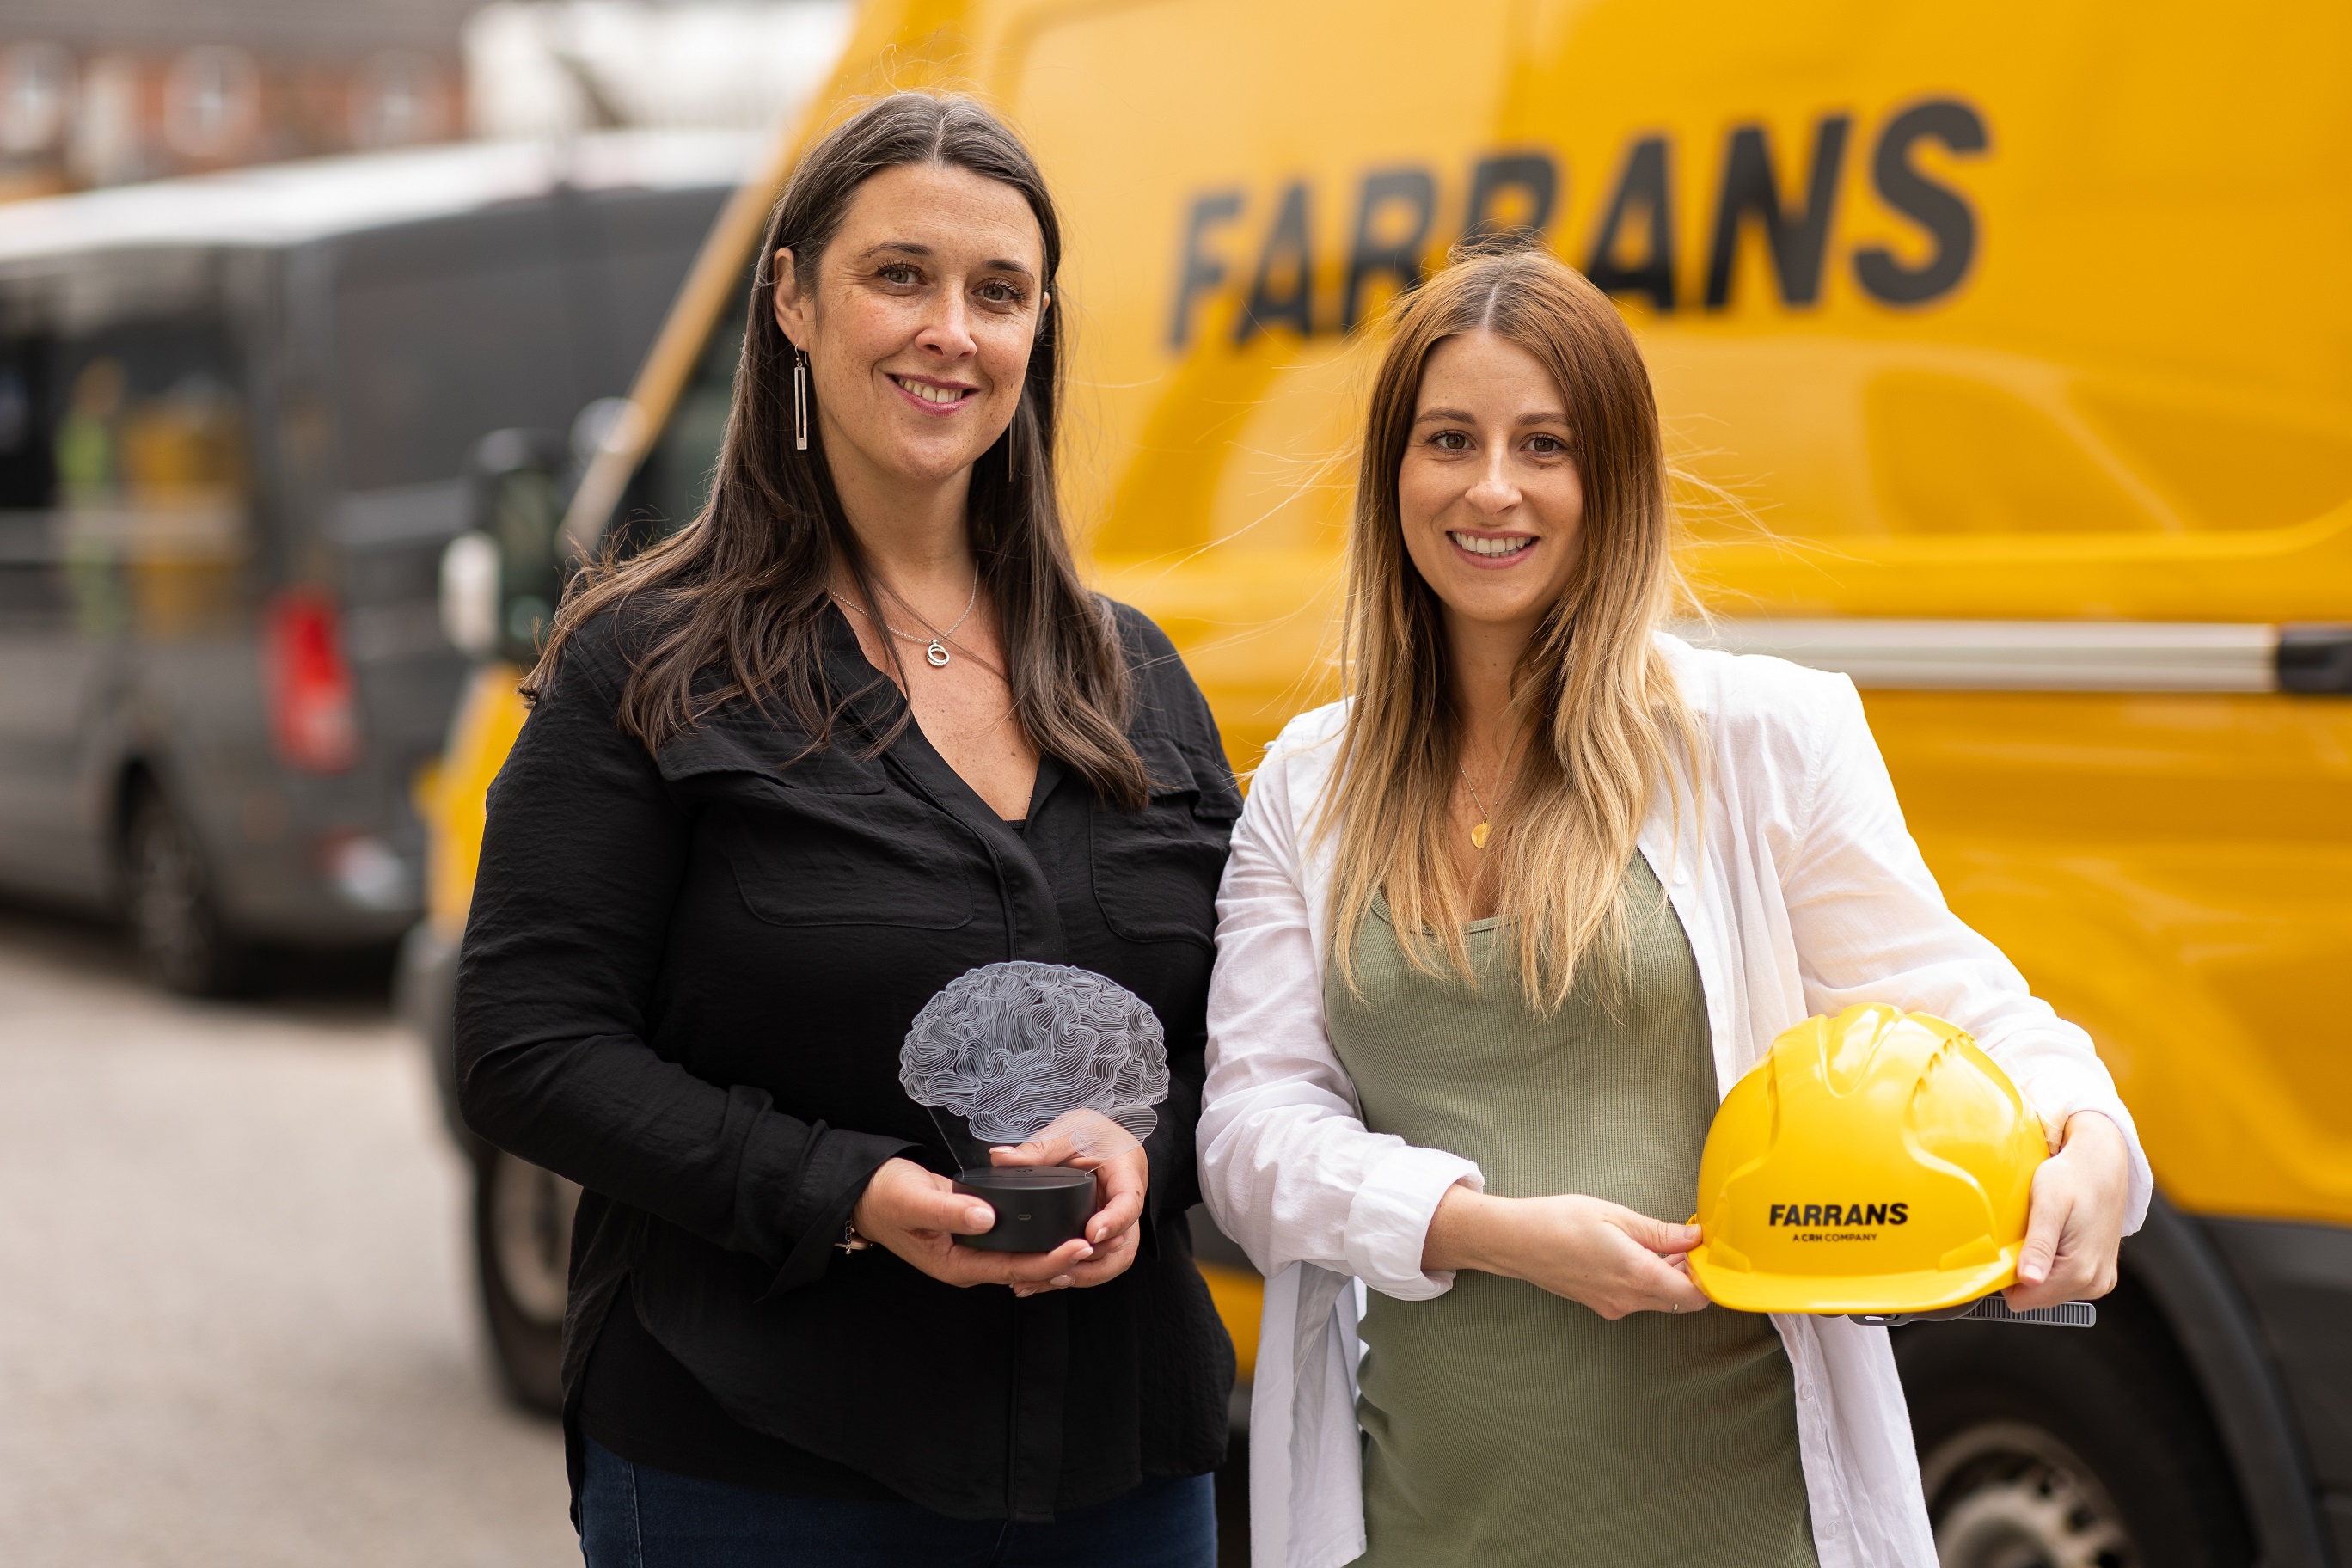 Farrans tackles mental health conversations head-on with internal training course